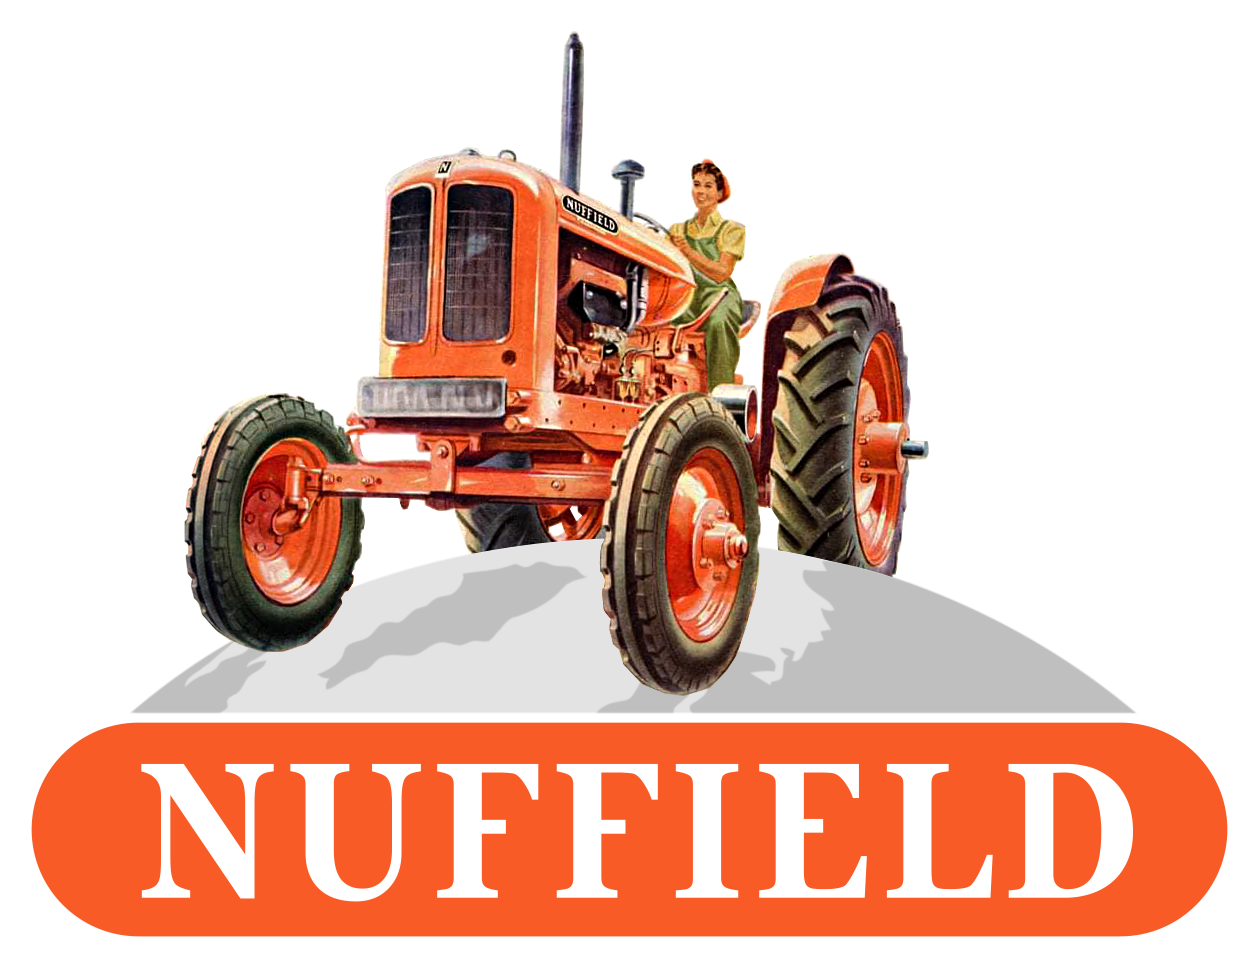 Old Nuffield Advertisements